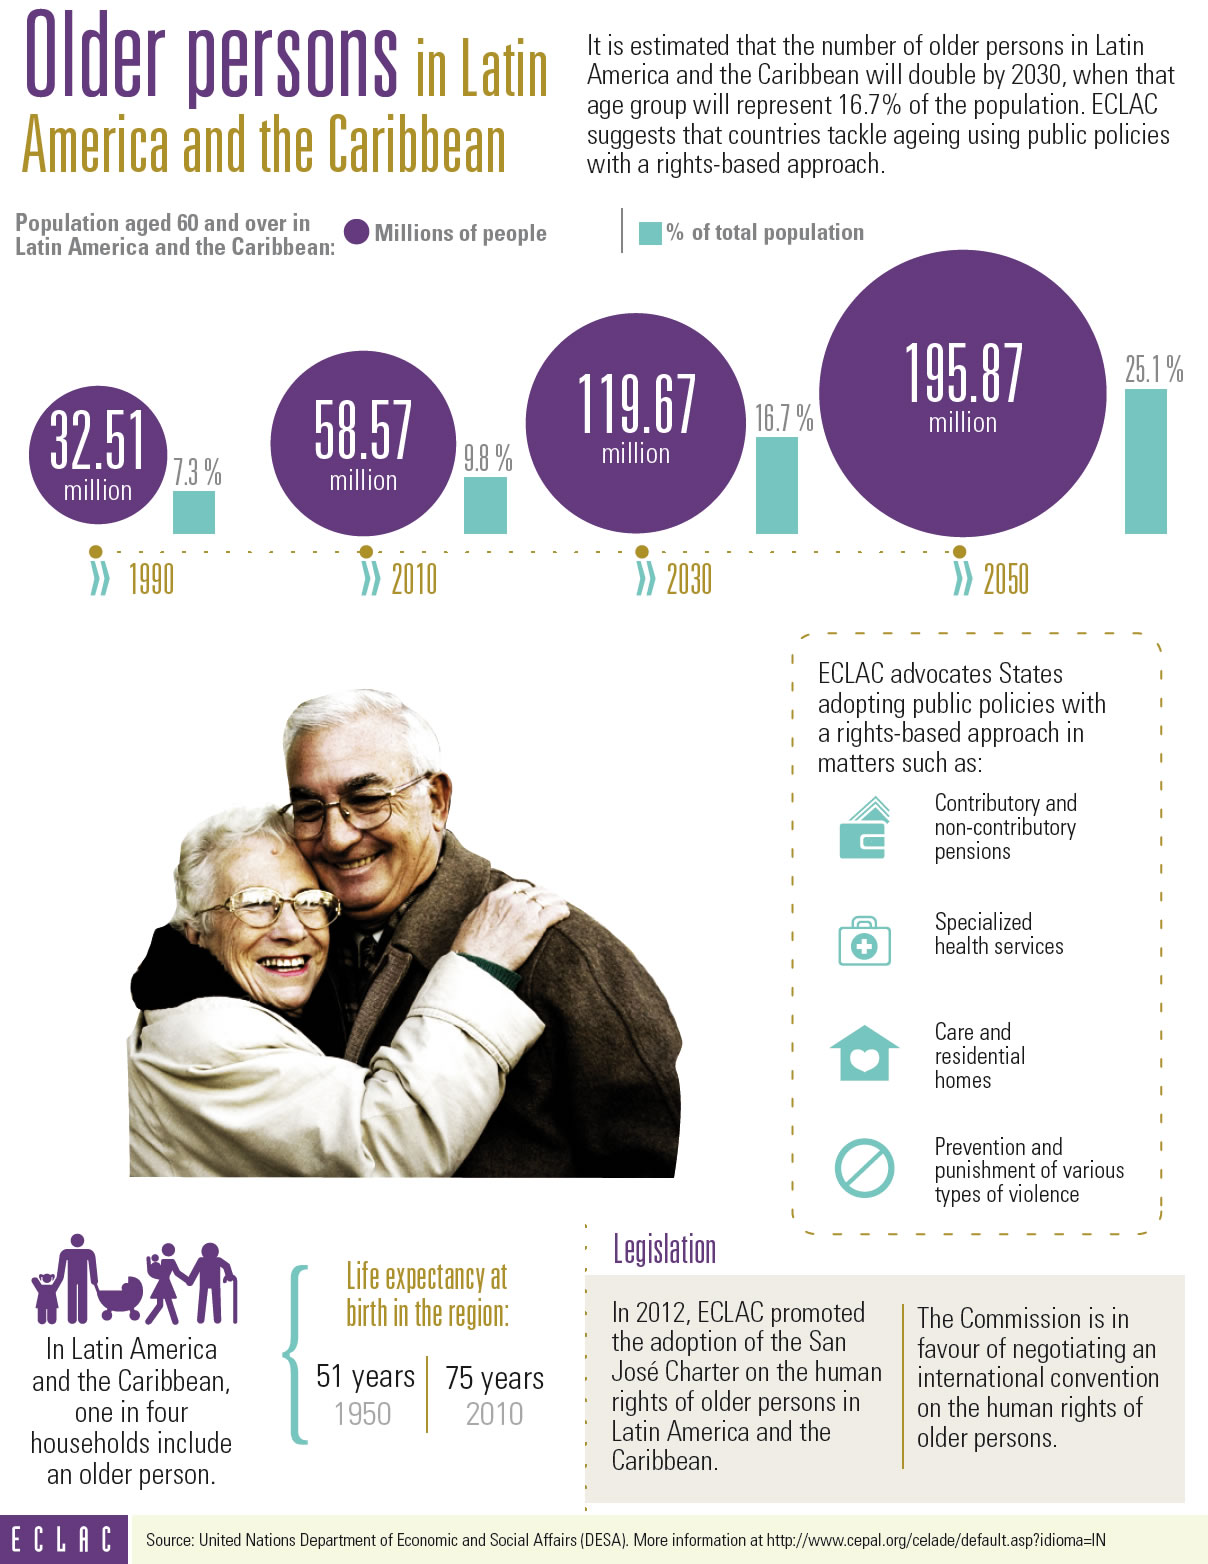 http://www.cepal.org/sites/default/files/infographic/images/older_persons.jpg